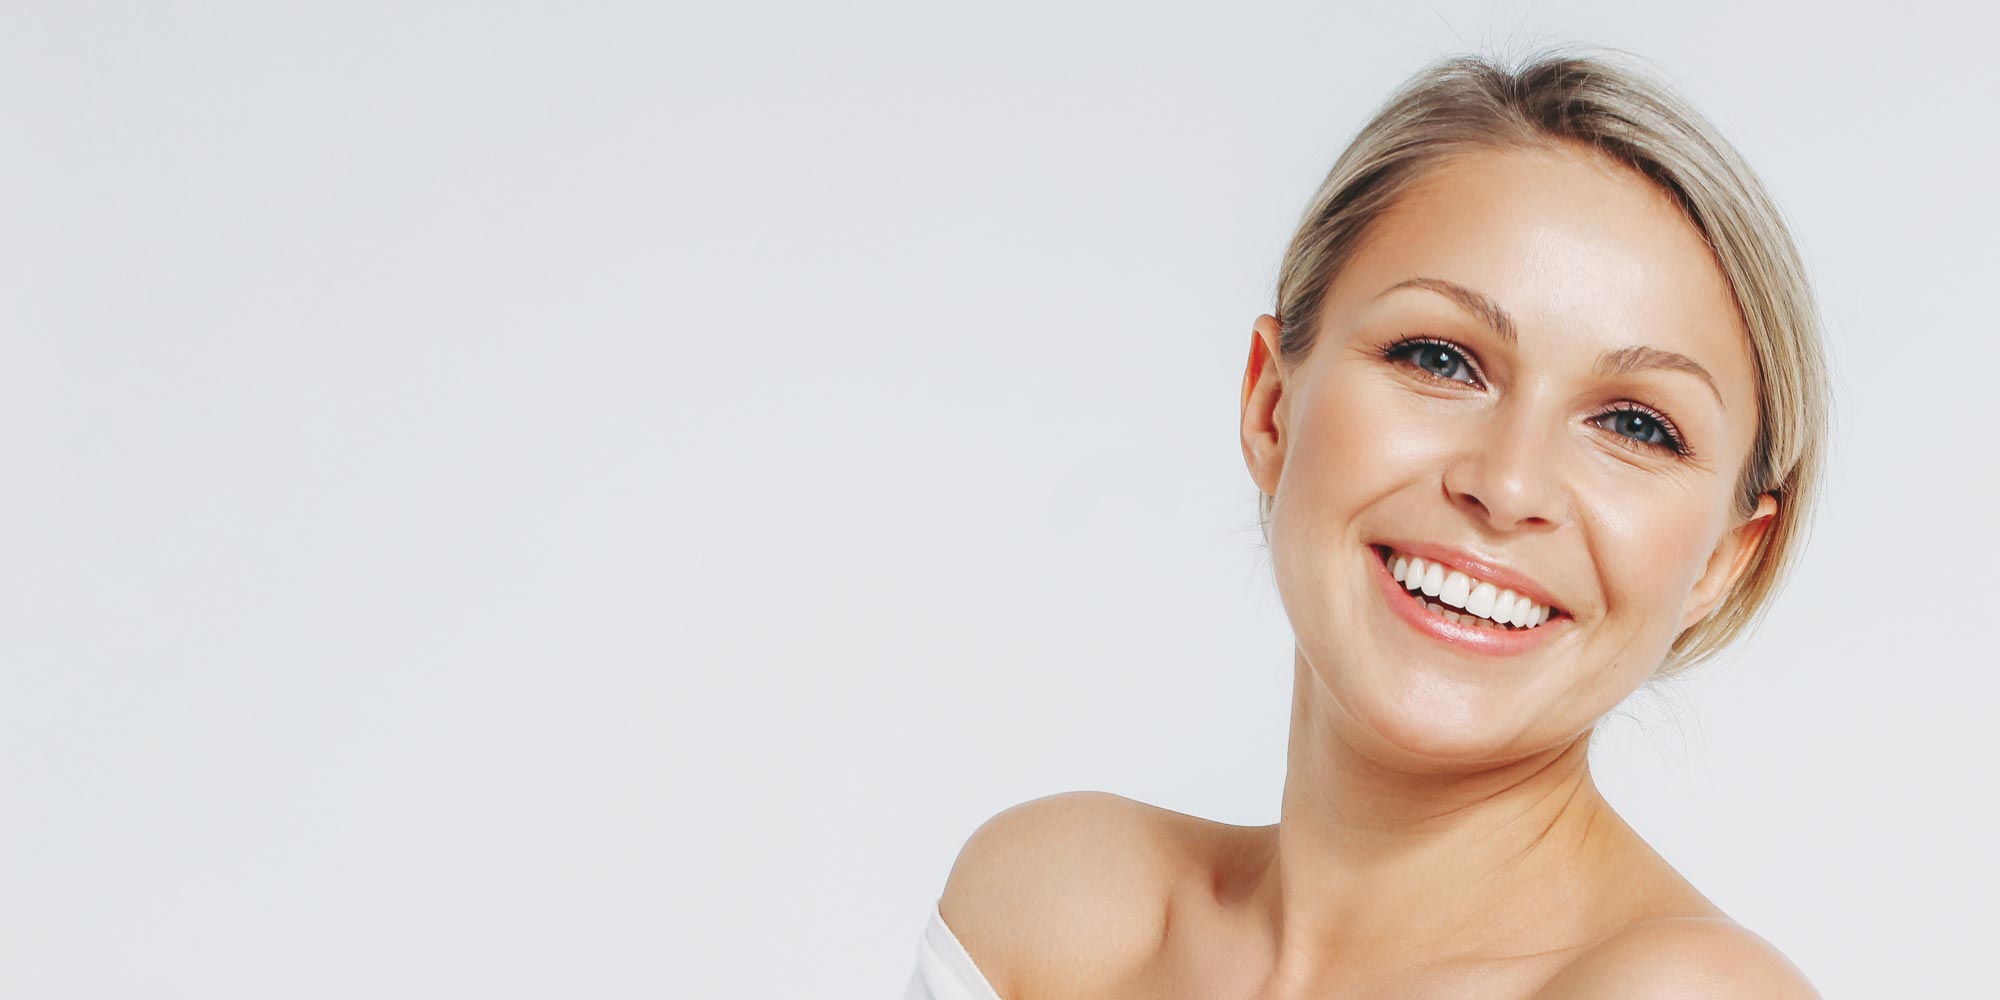 Get to Know the Ins-and-Outs About Light Therapy or LED Skin Treatments